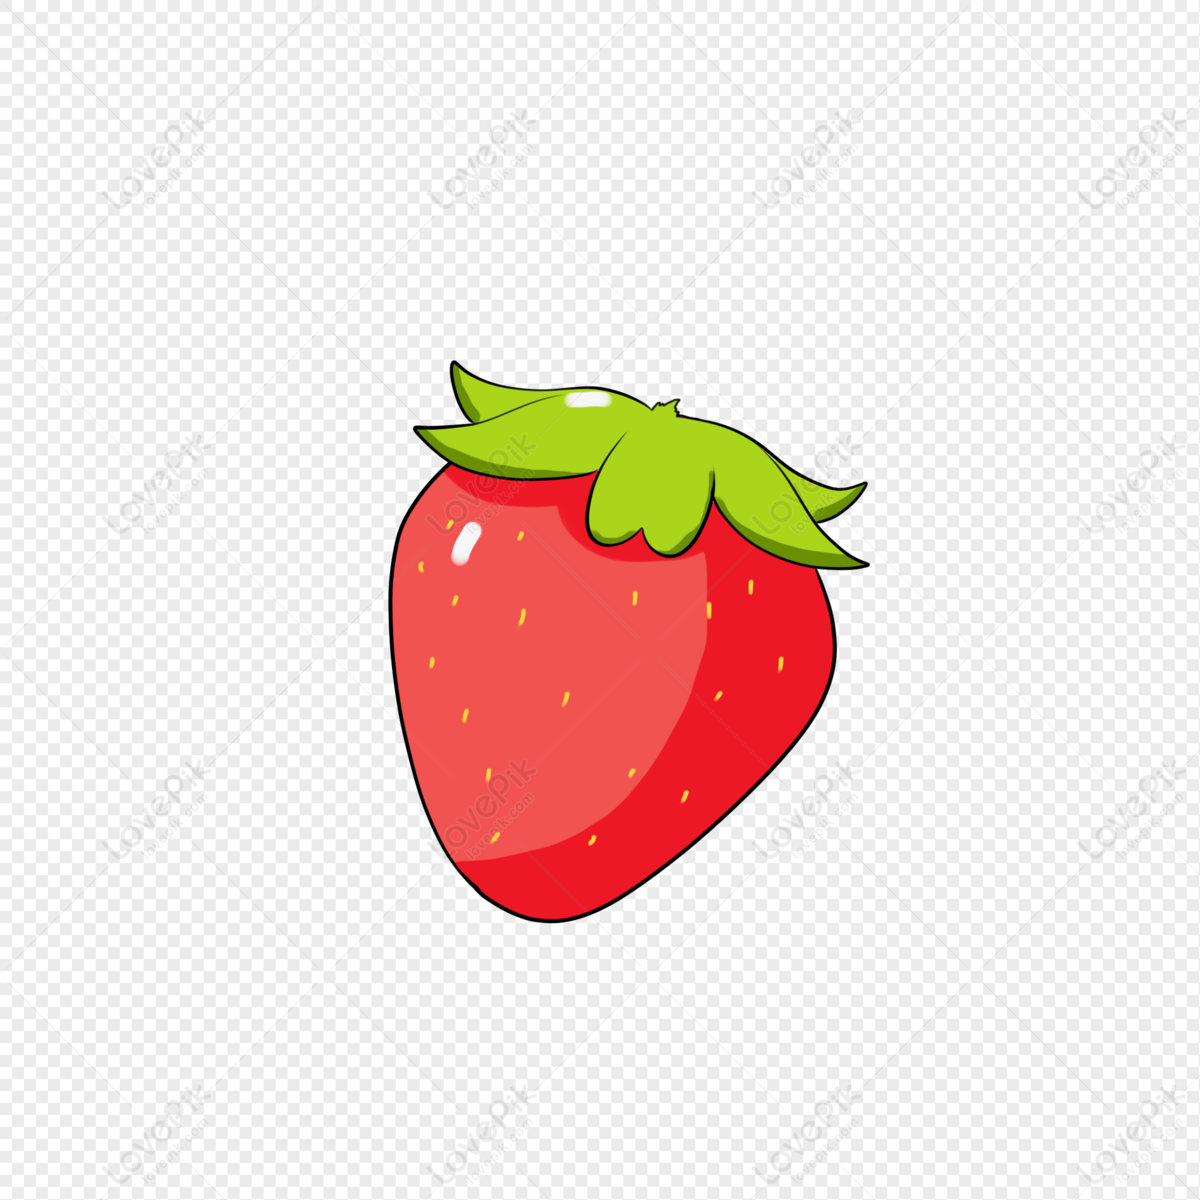 Strawberry Cartoon Cool Summer PNG Hd Transparent Image And Clipart Image  For Free Download - Lovepik | 401197404